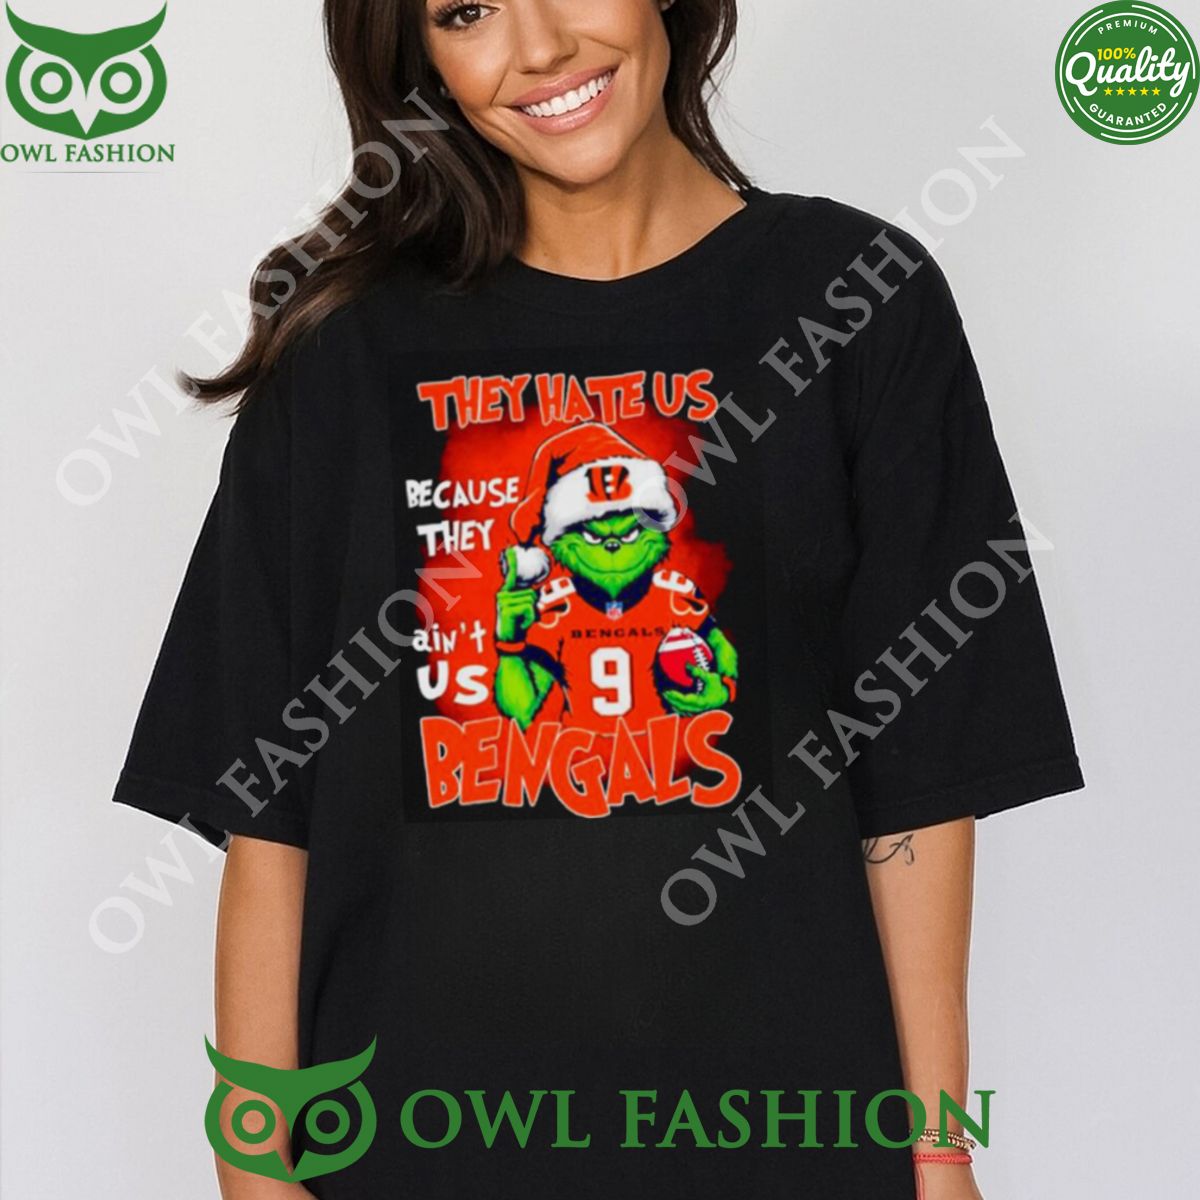 Santa Grinch they hate us because they ain’t us Bengals Tshirt